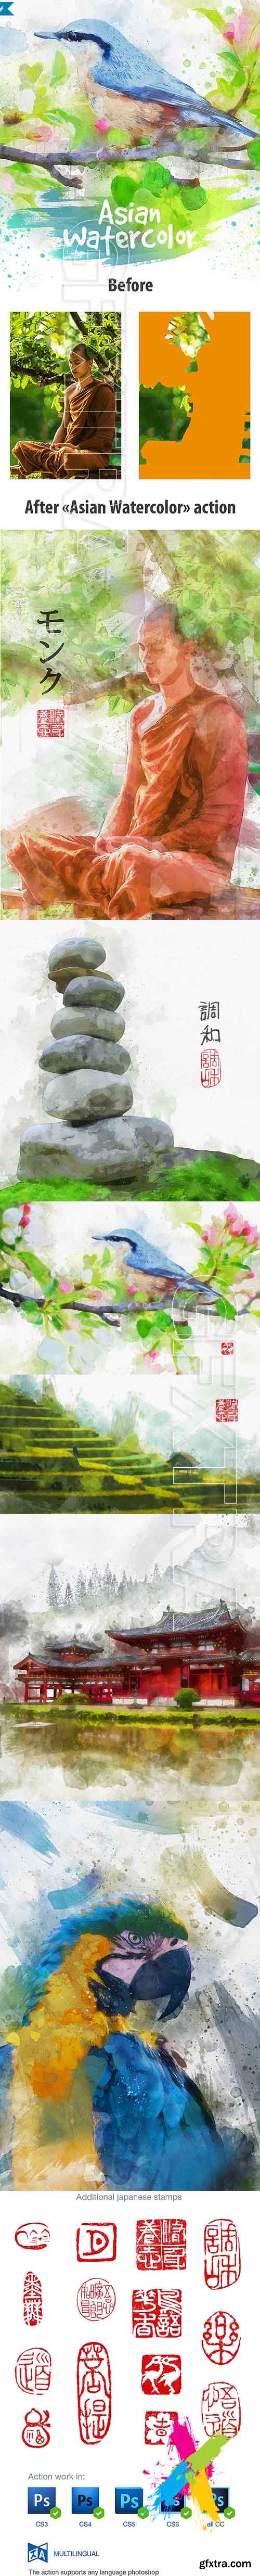 Graphicriver - Asian Watercolor Photoshop Action 20155346